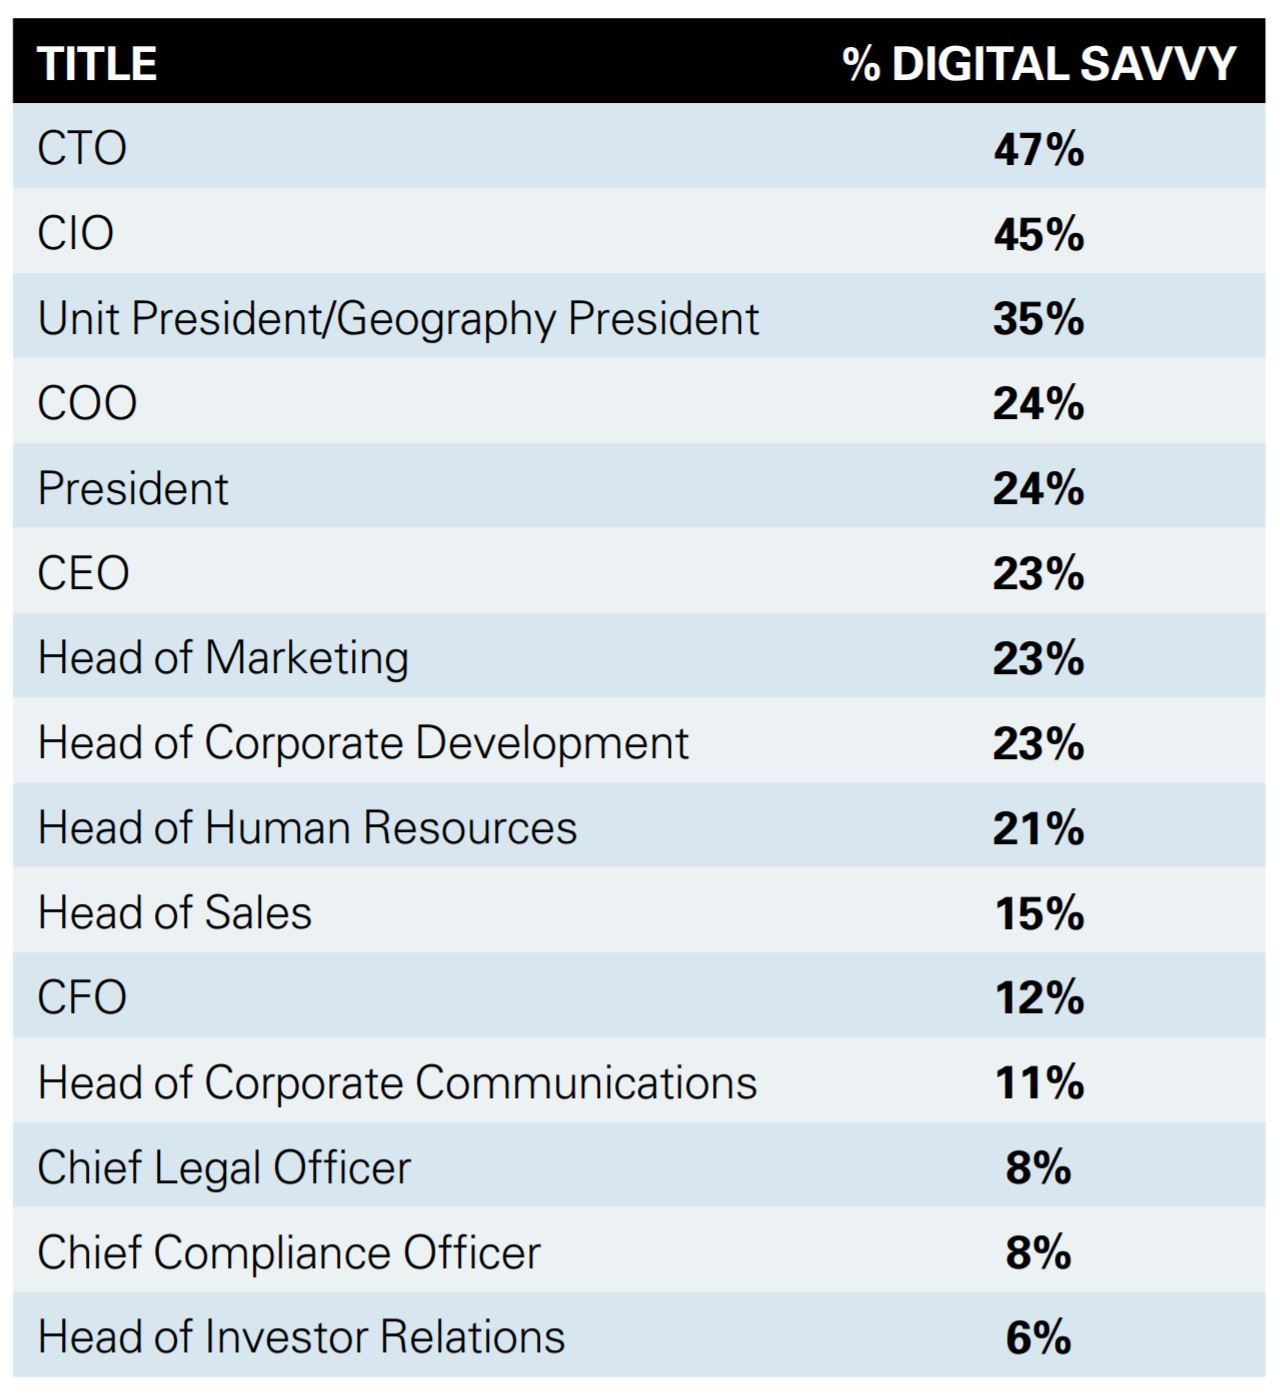 The Most — and Least — Digitally Savvy Executive Roles